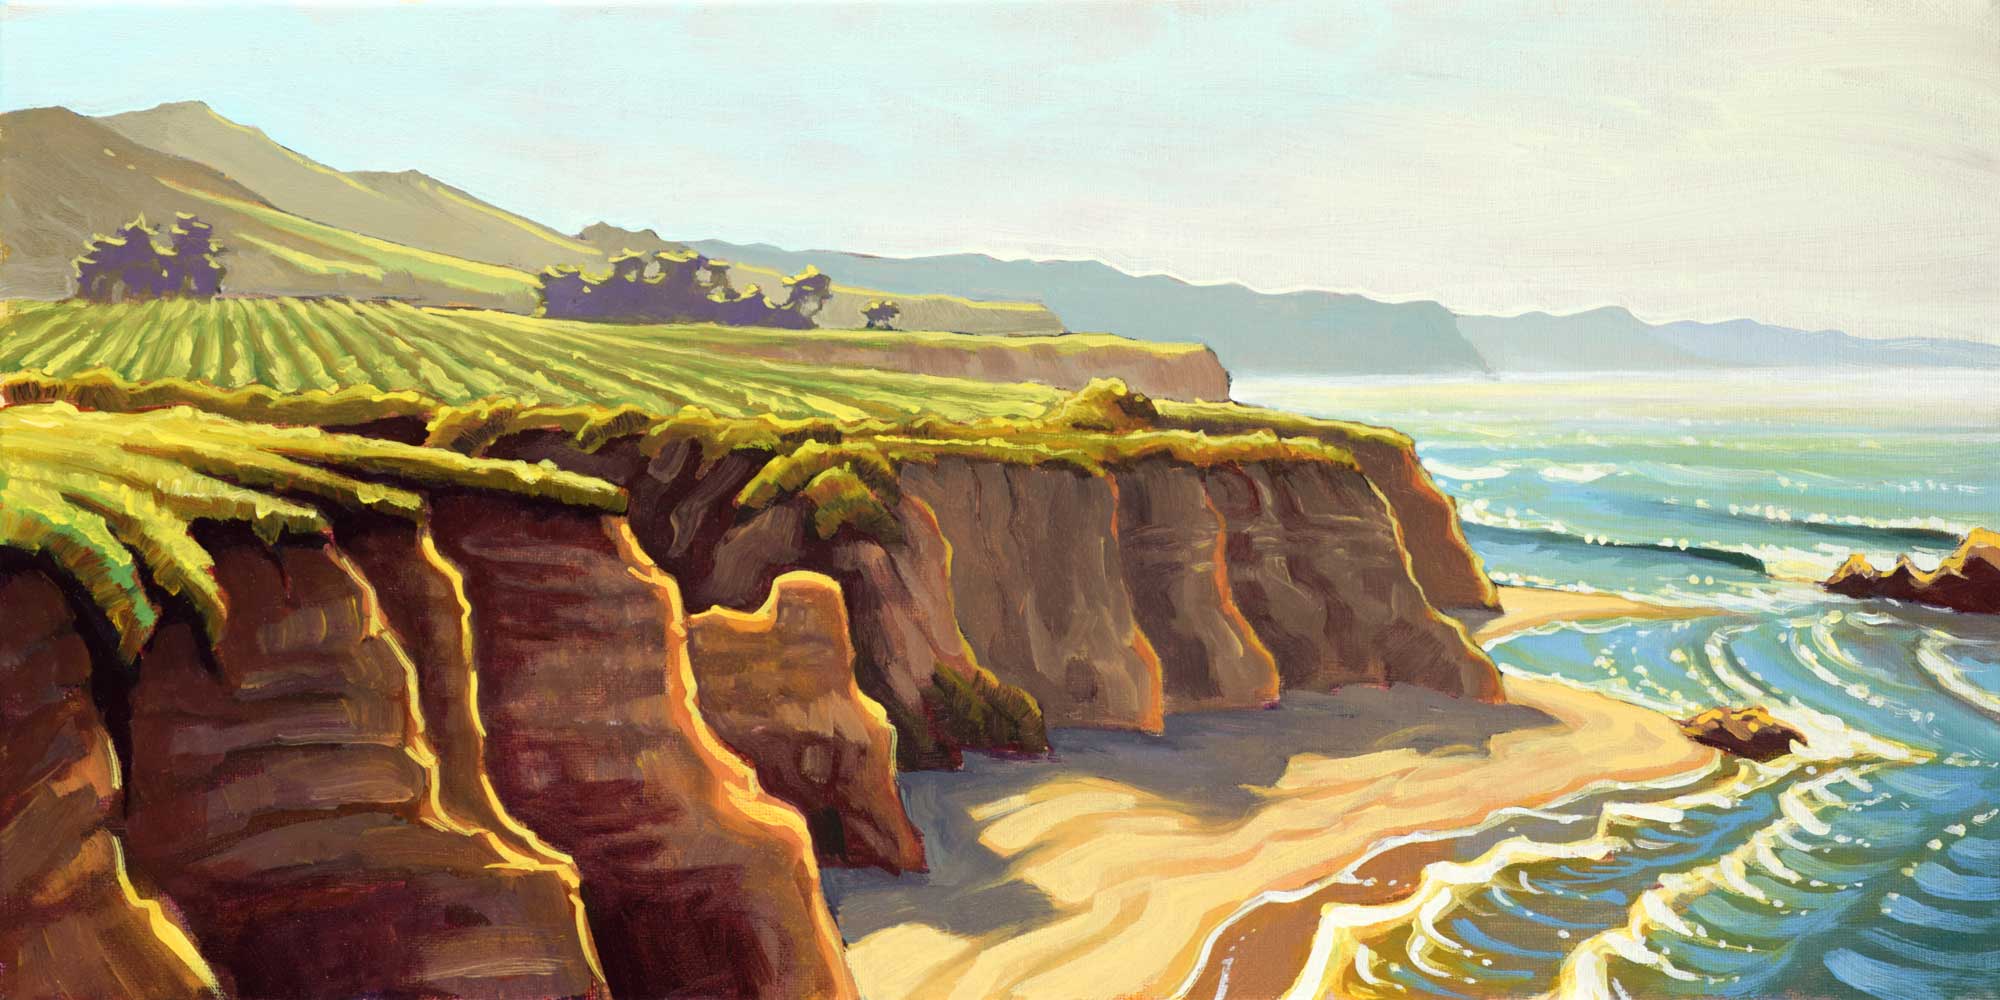 Plein air artwork from the hiking trails at Purisima point on the San Mateo coast of Central California